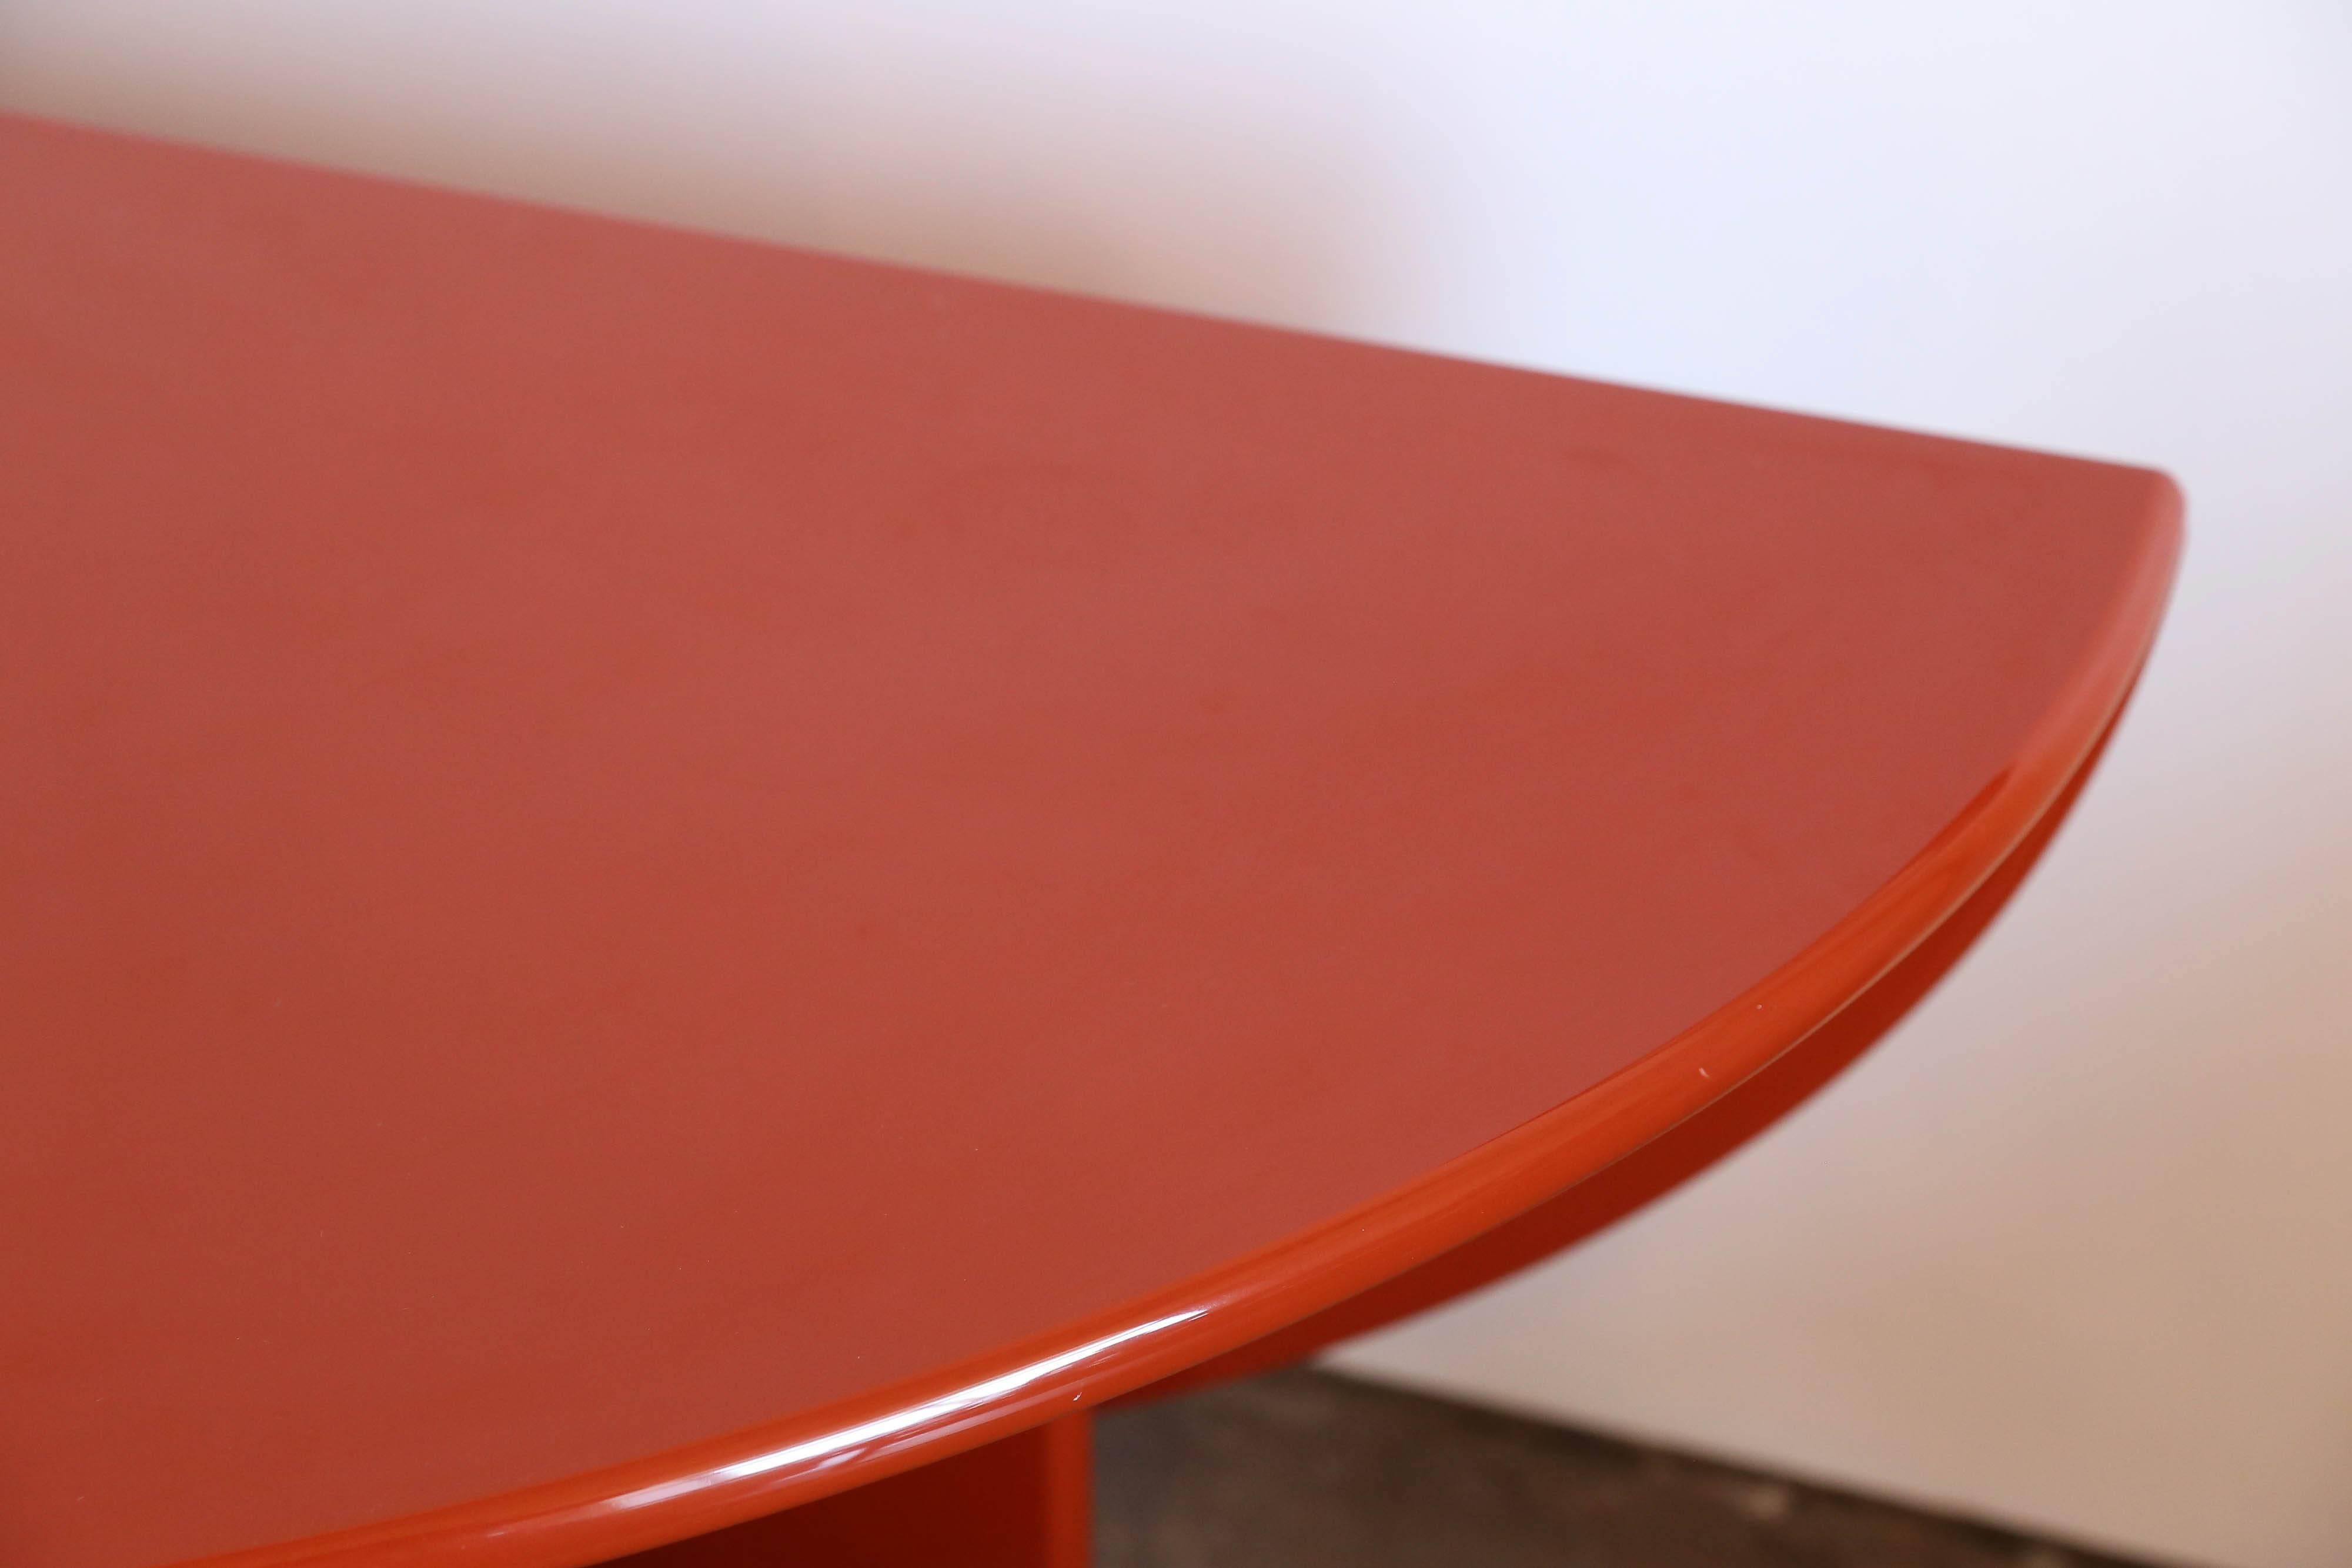 Offered is a Mid-Century Modern Italian Kazuhide Takahama red lacquered 